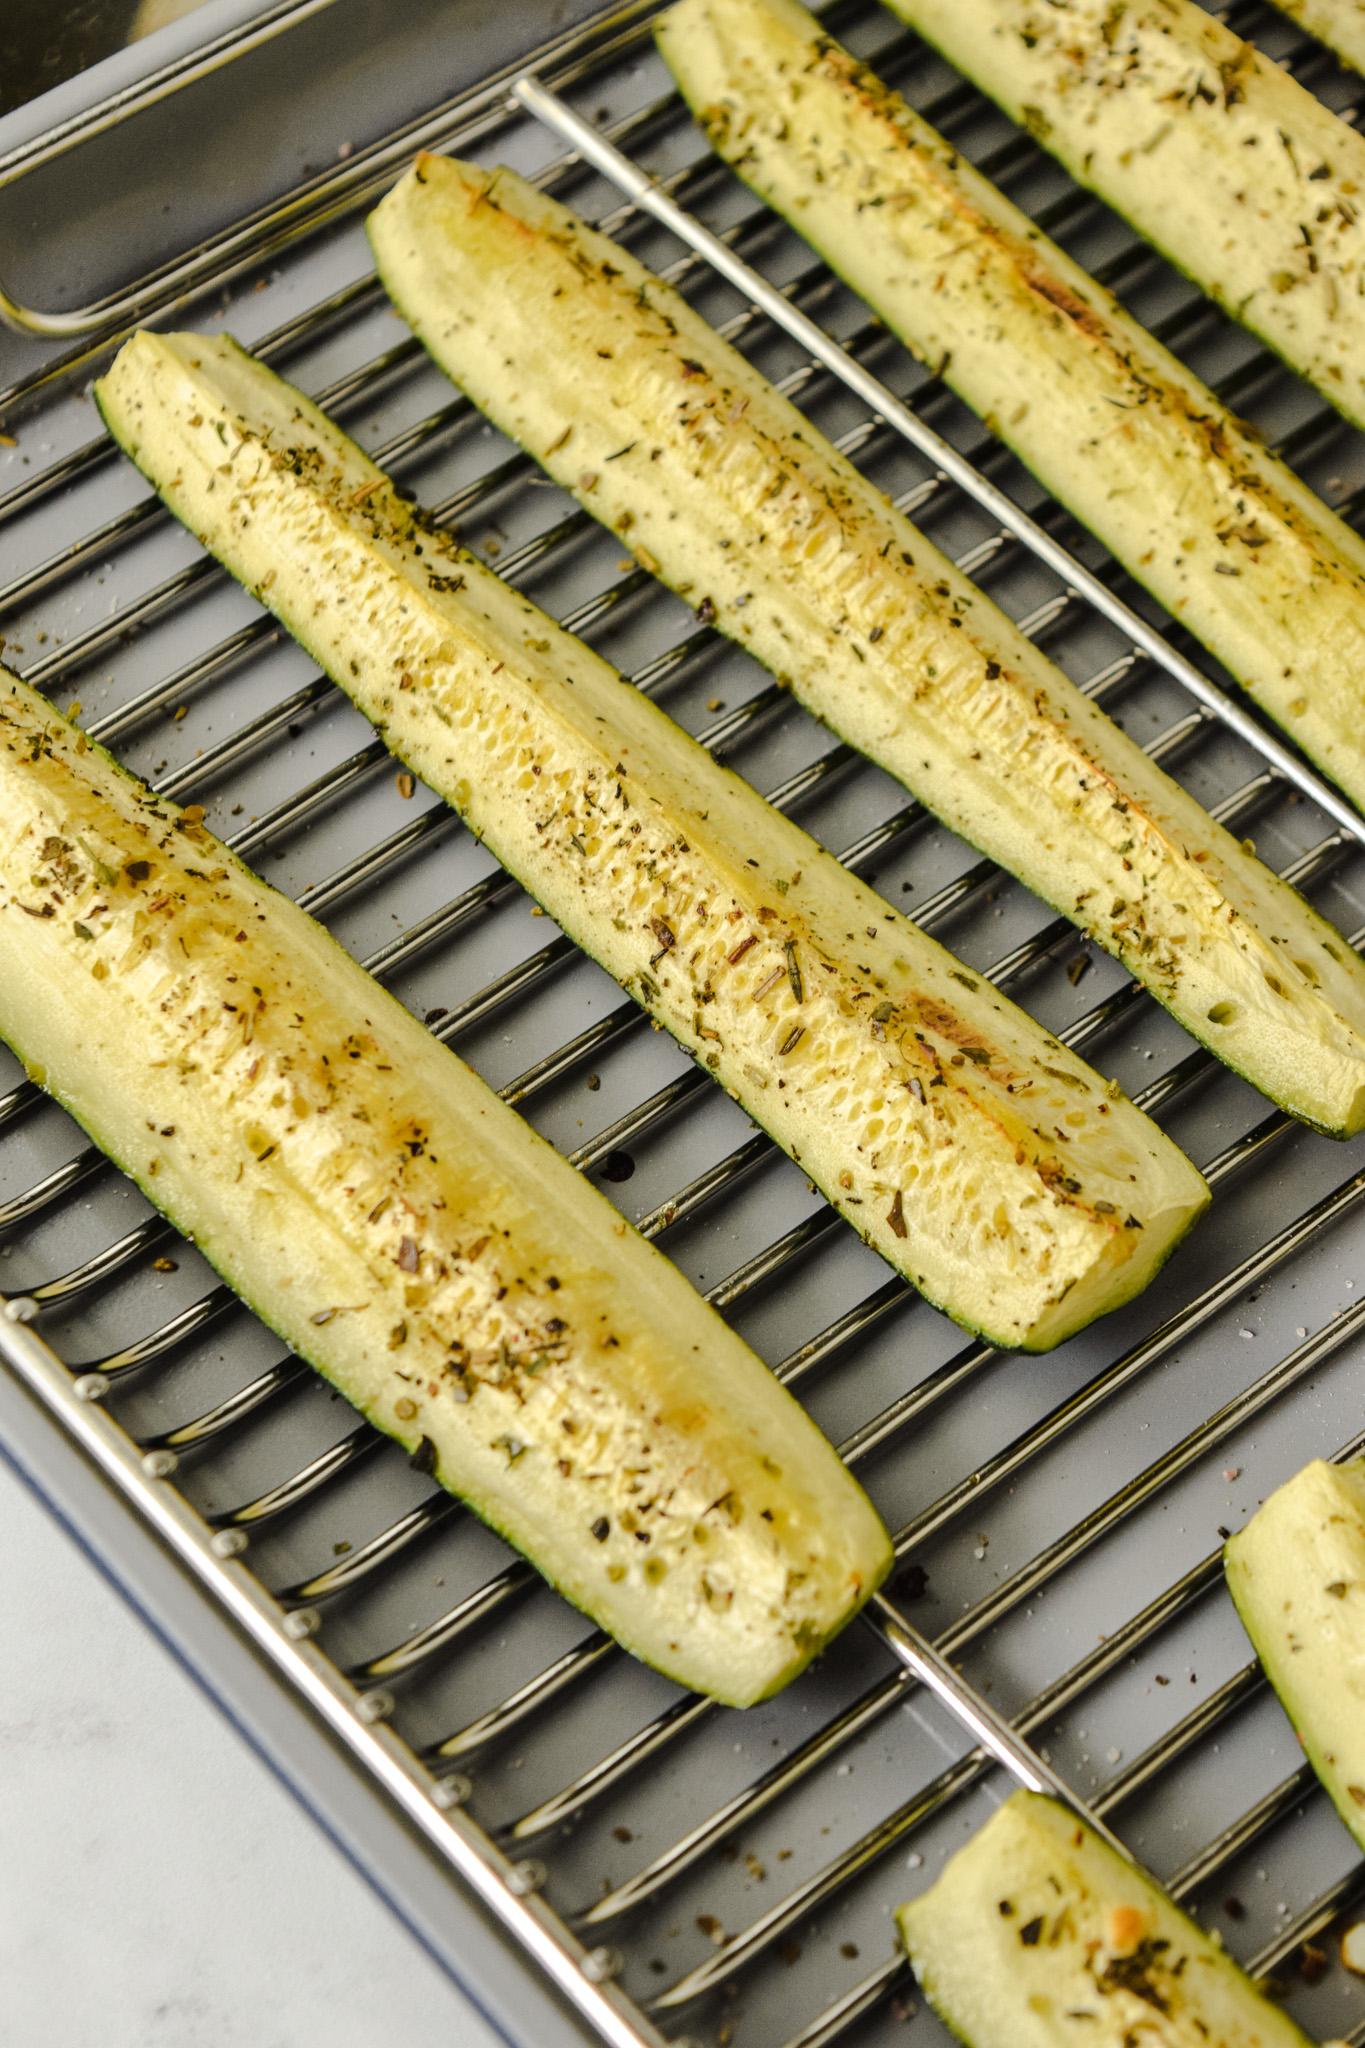 Broiled Zucchini Spears on a Baking Sheet with a Rack